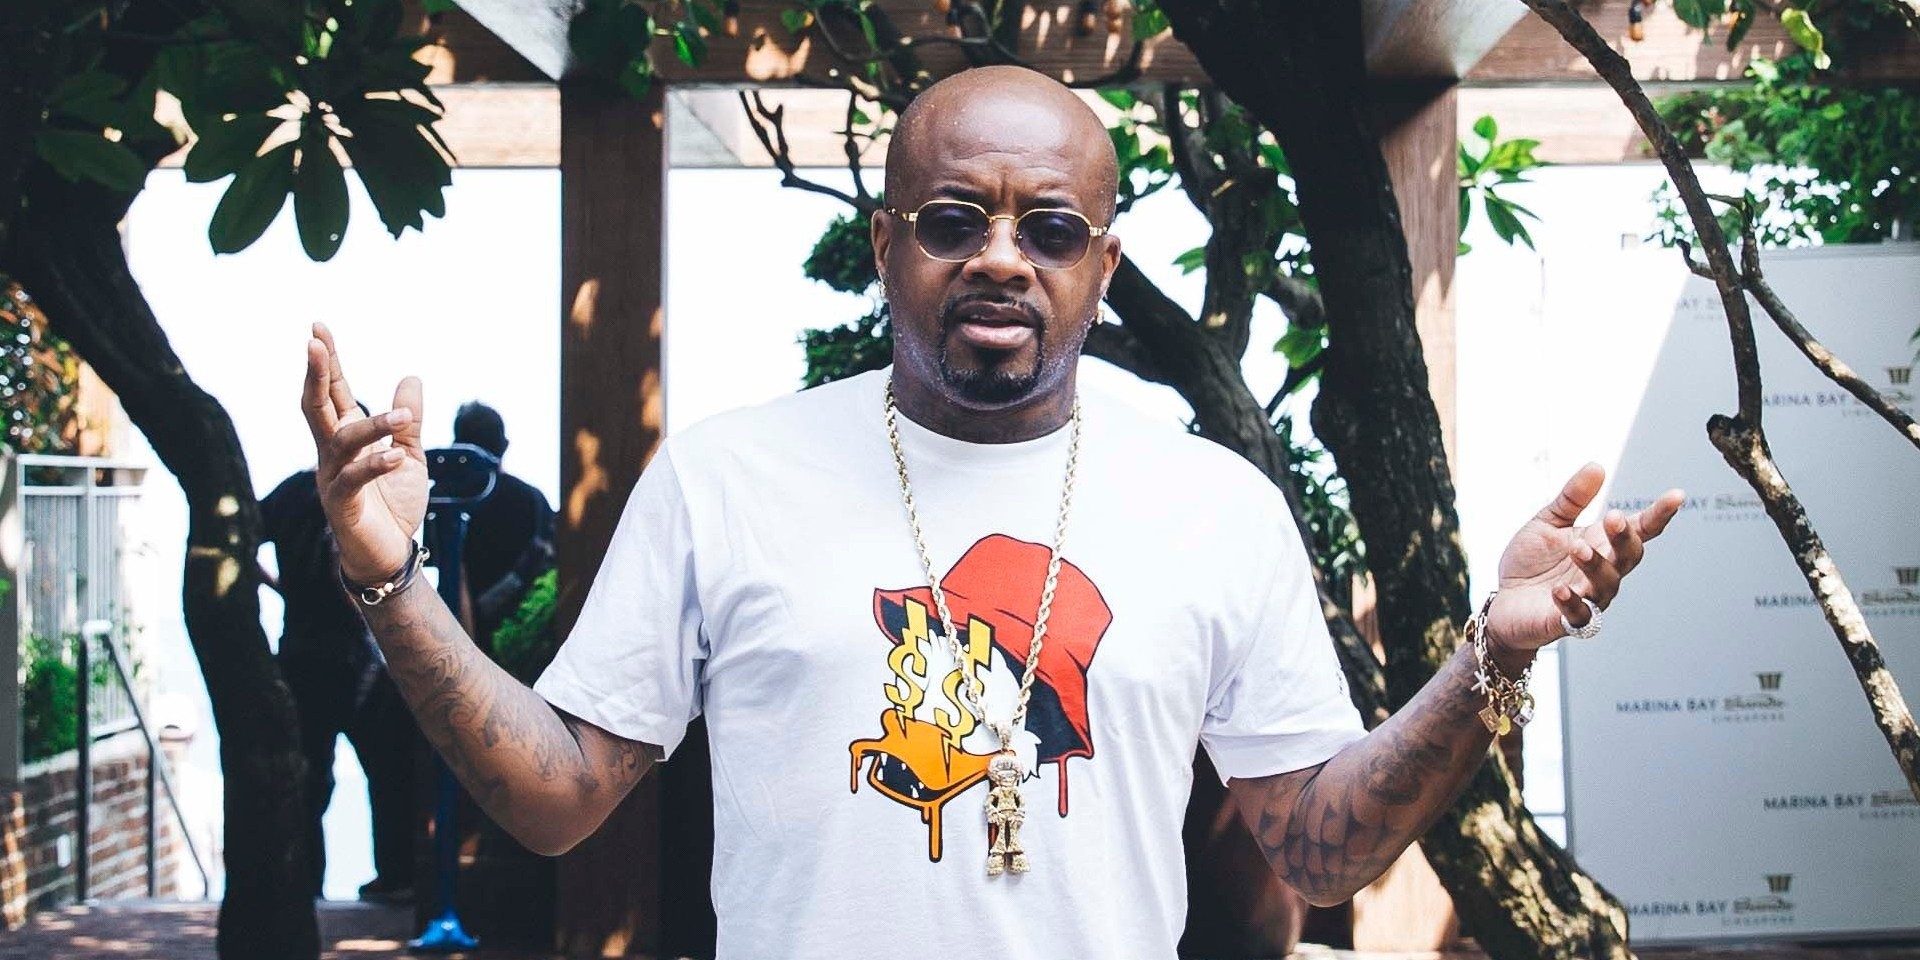 "Let the battle go!": Jermaine Dupri reflects on hip-hop's journey from past to present